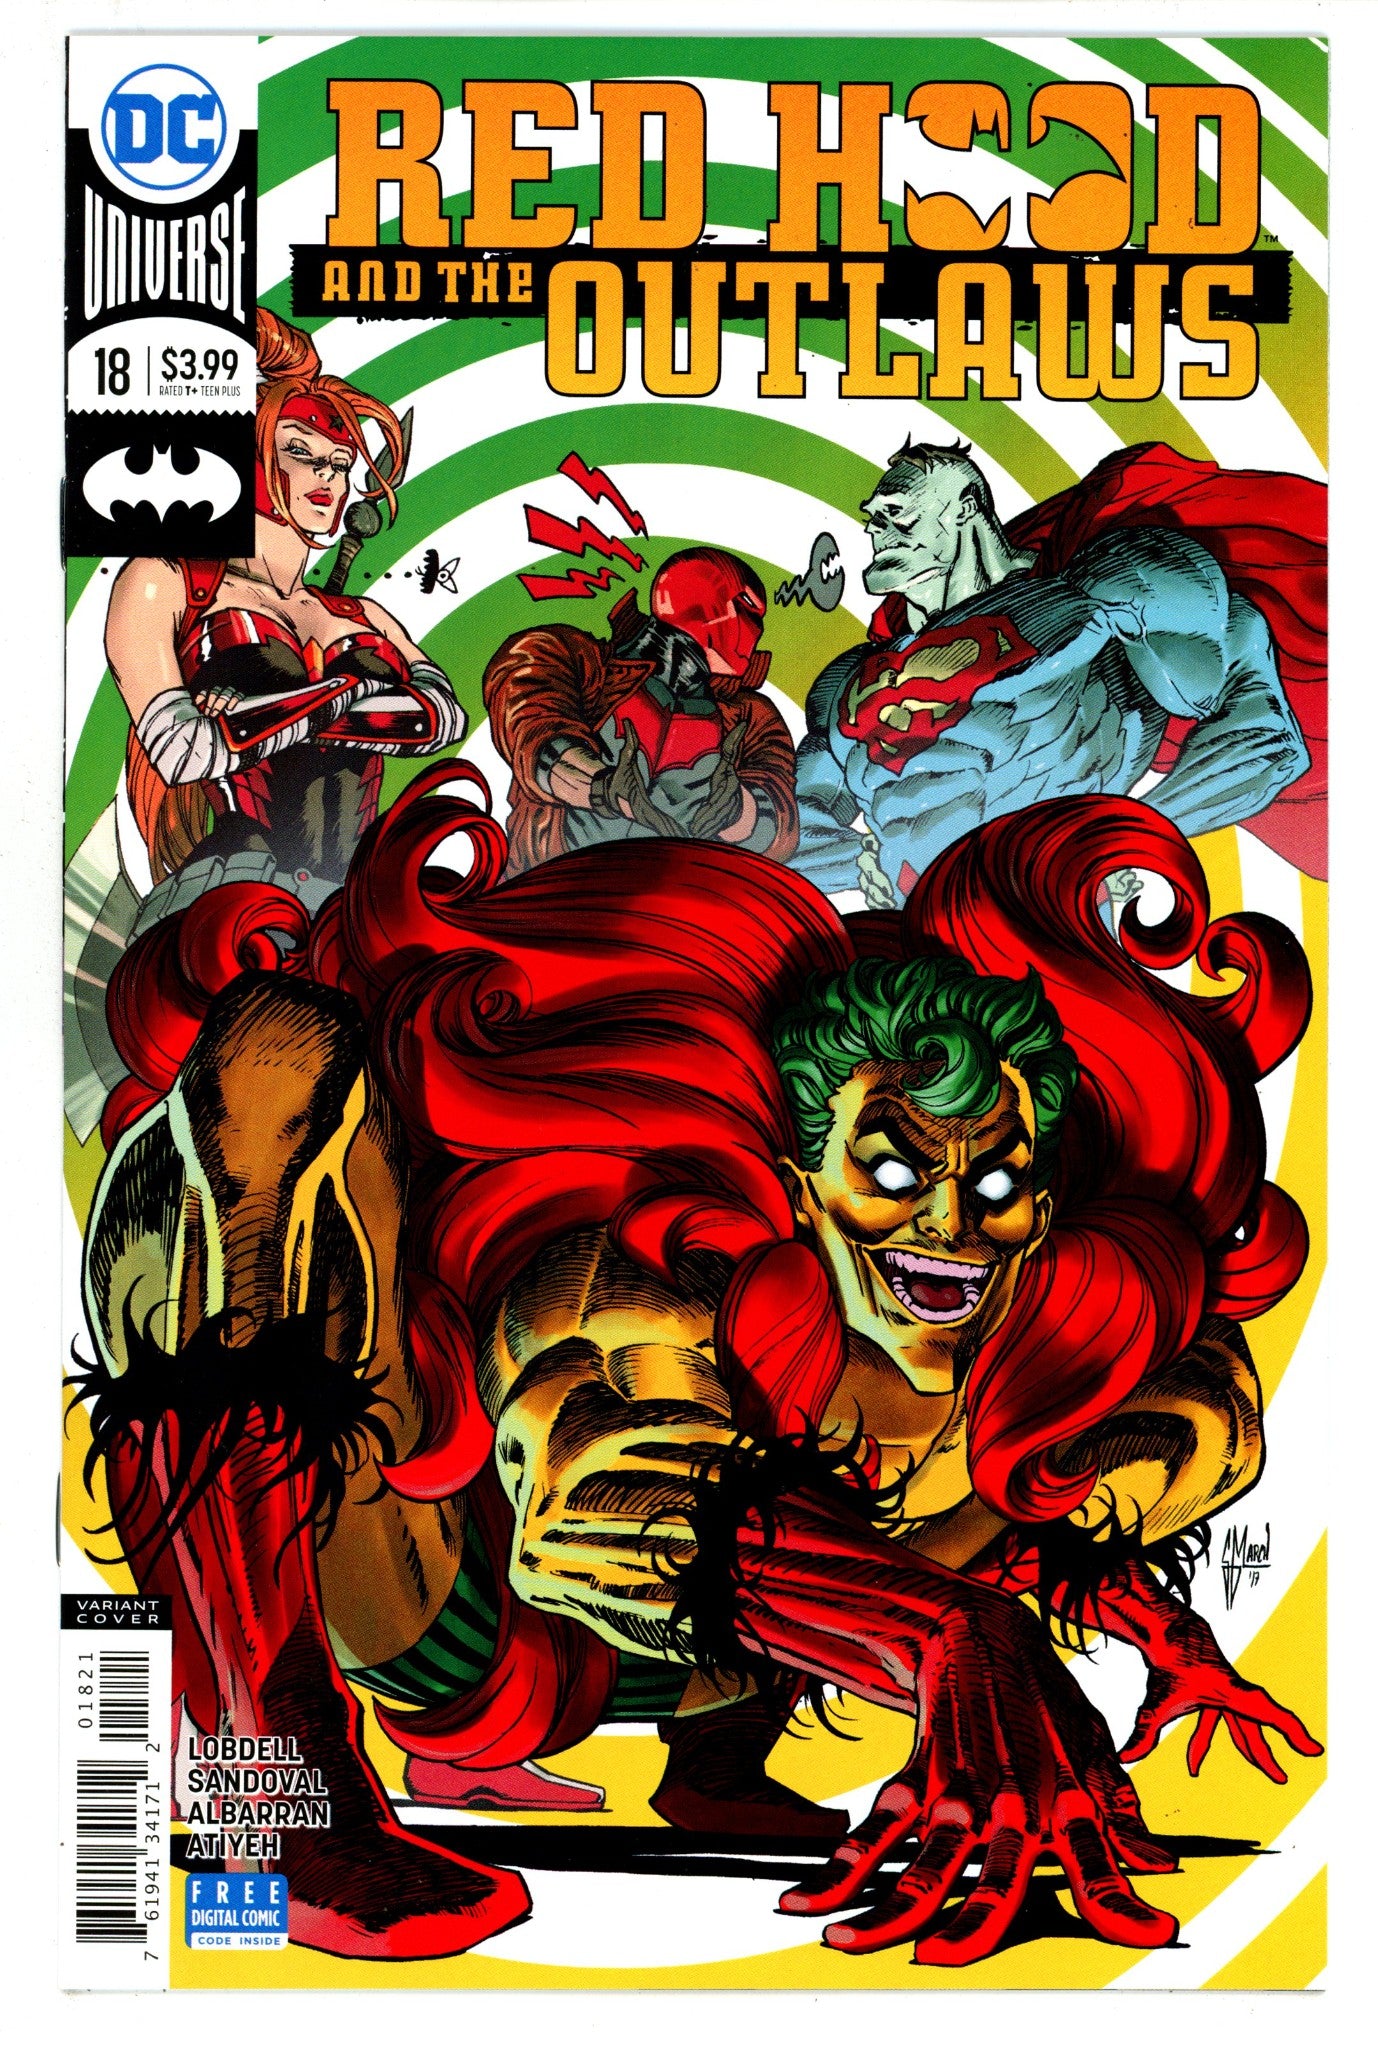 Red Hood and the Outlaws Vol 2 18 High Grade (2018) March Variant 